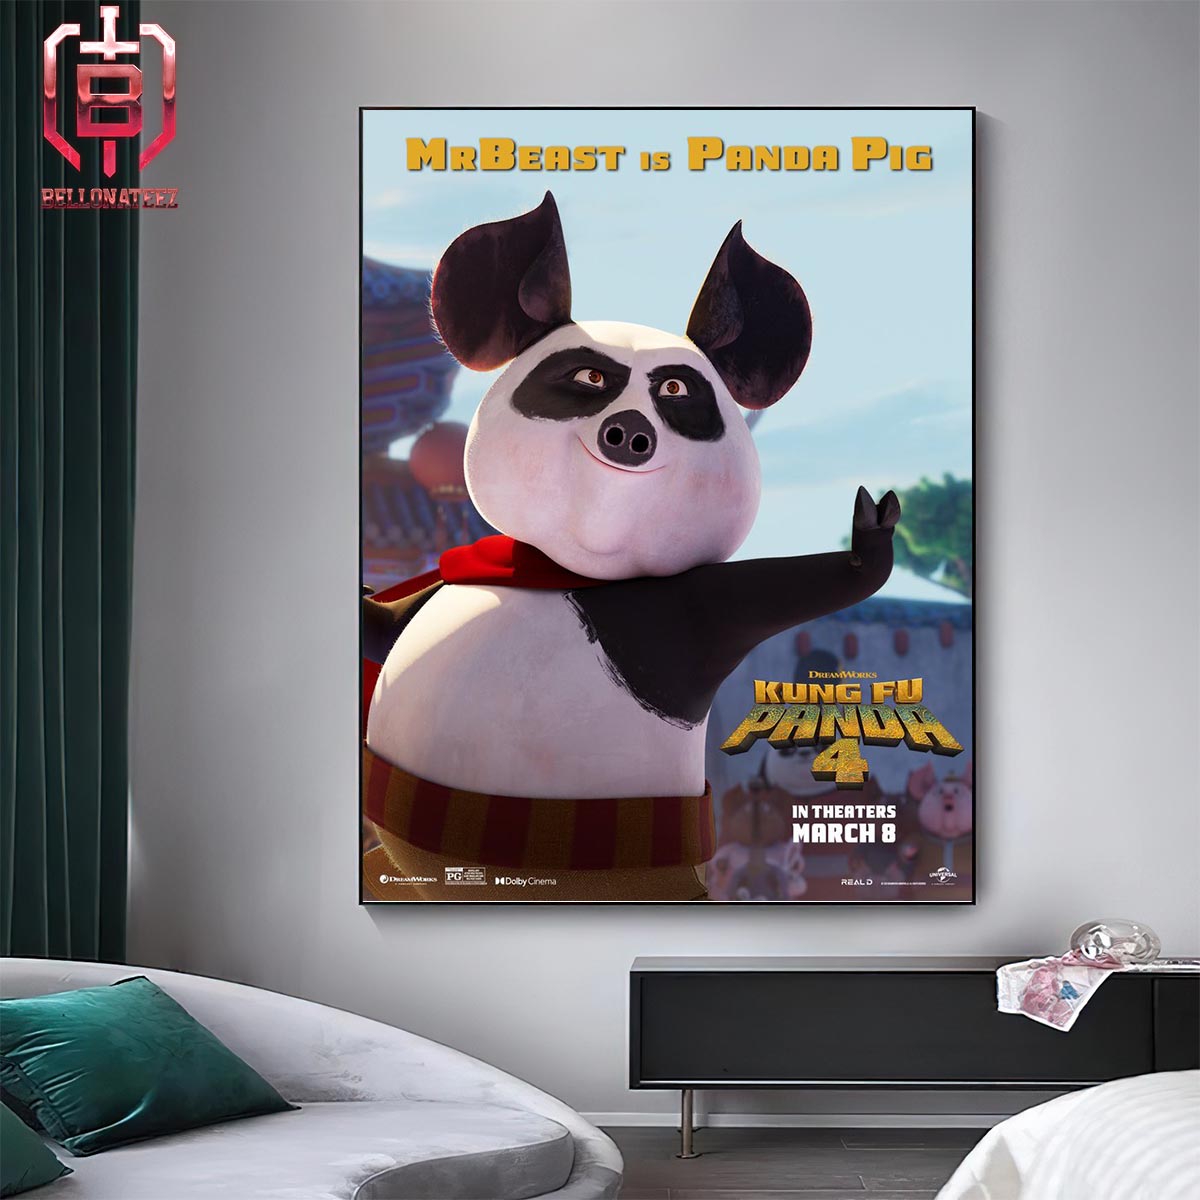 Mr Beast Will Star As Panda Pig In Kungfu Panda 4 In Theater March